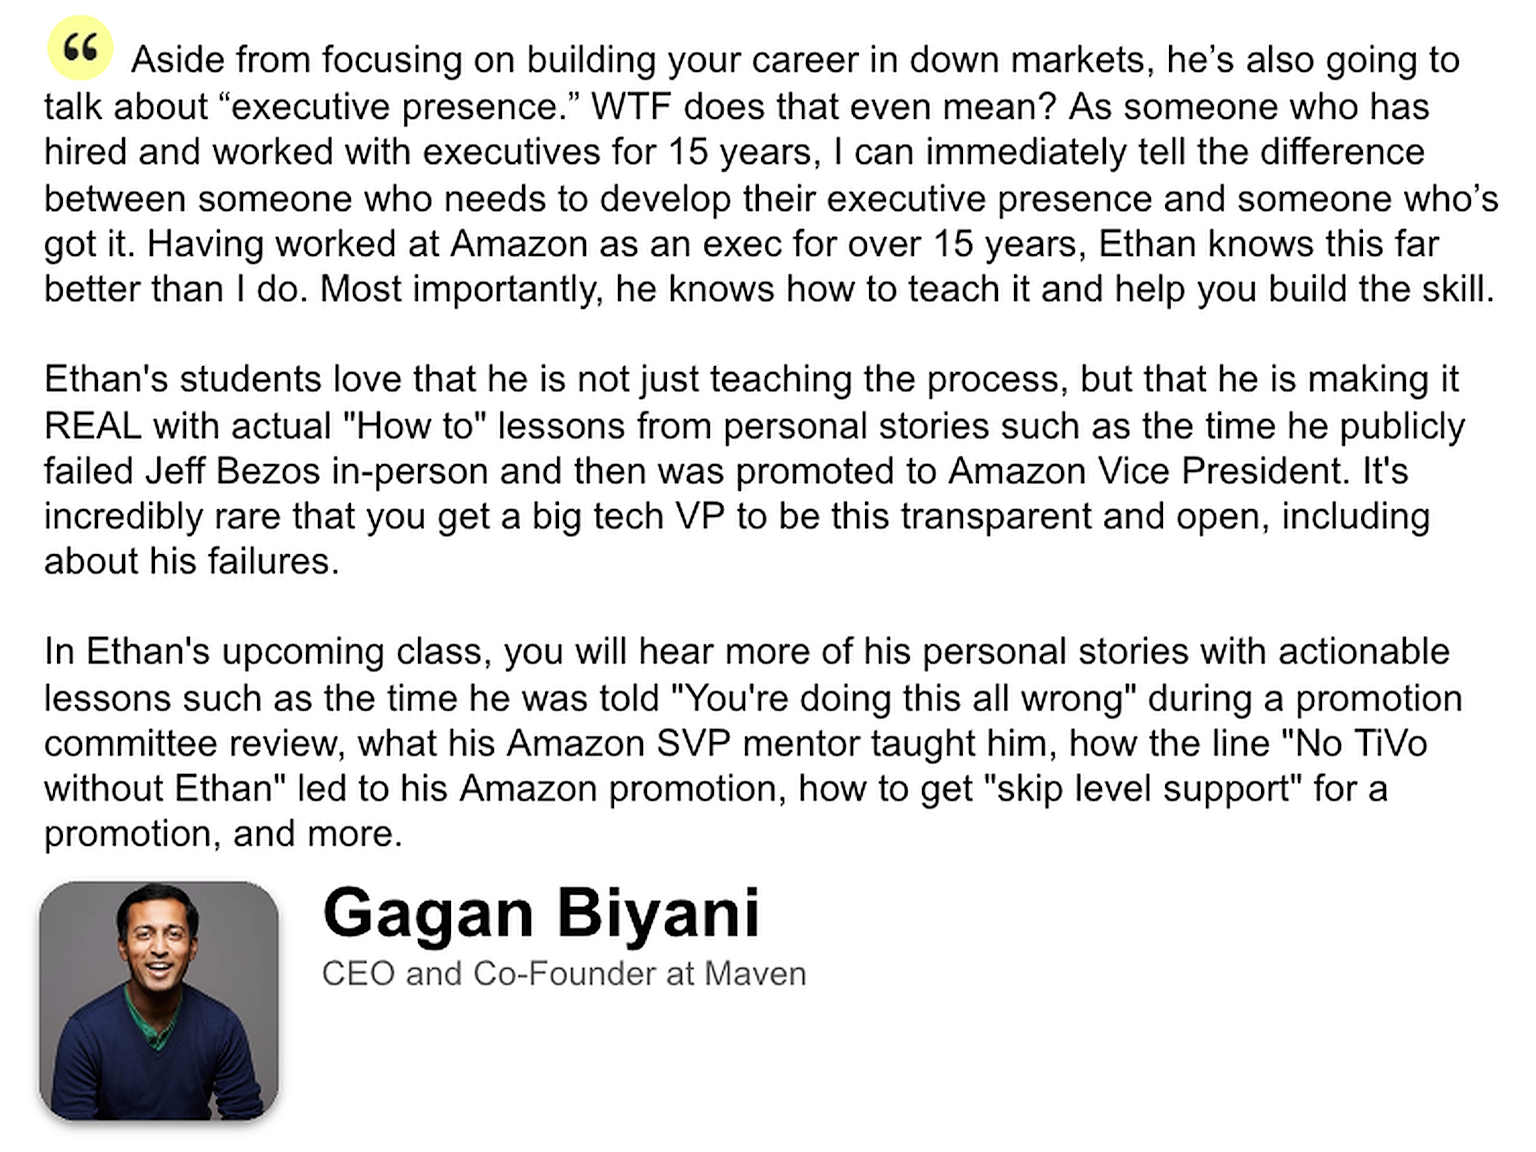 Read what Gagan Biyani, CEO and Co-Founder of Maven, said about the value of Ethan's course